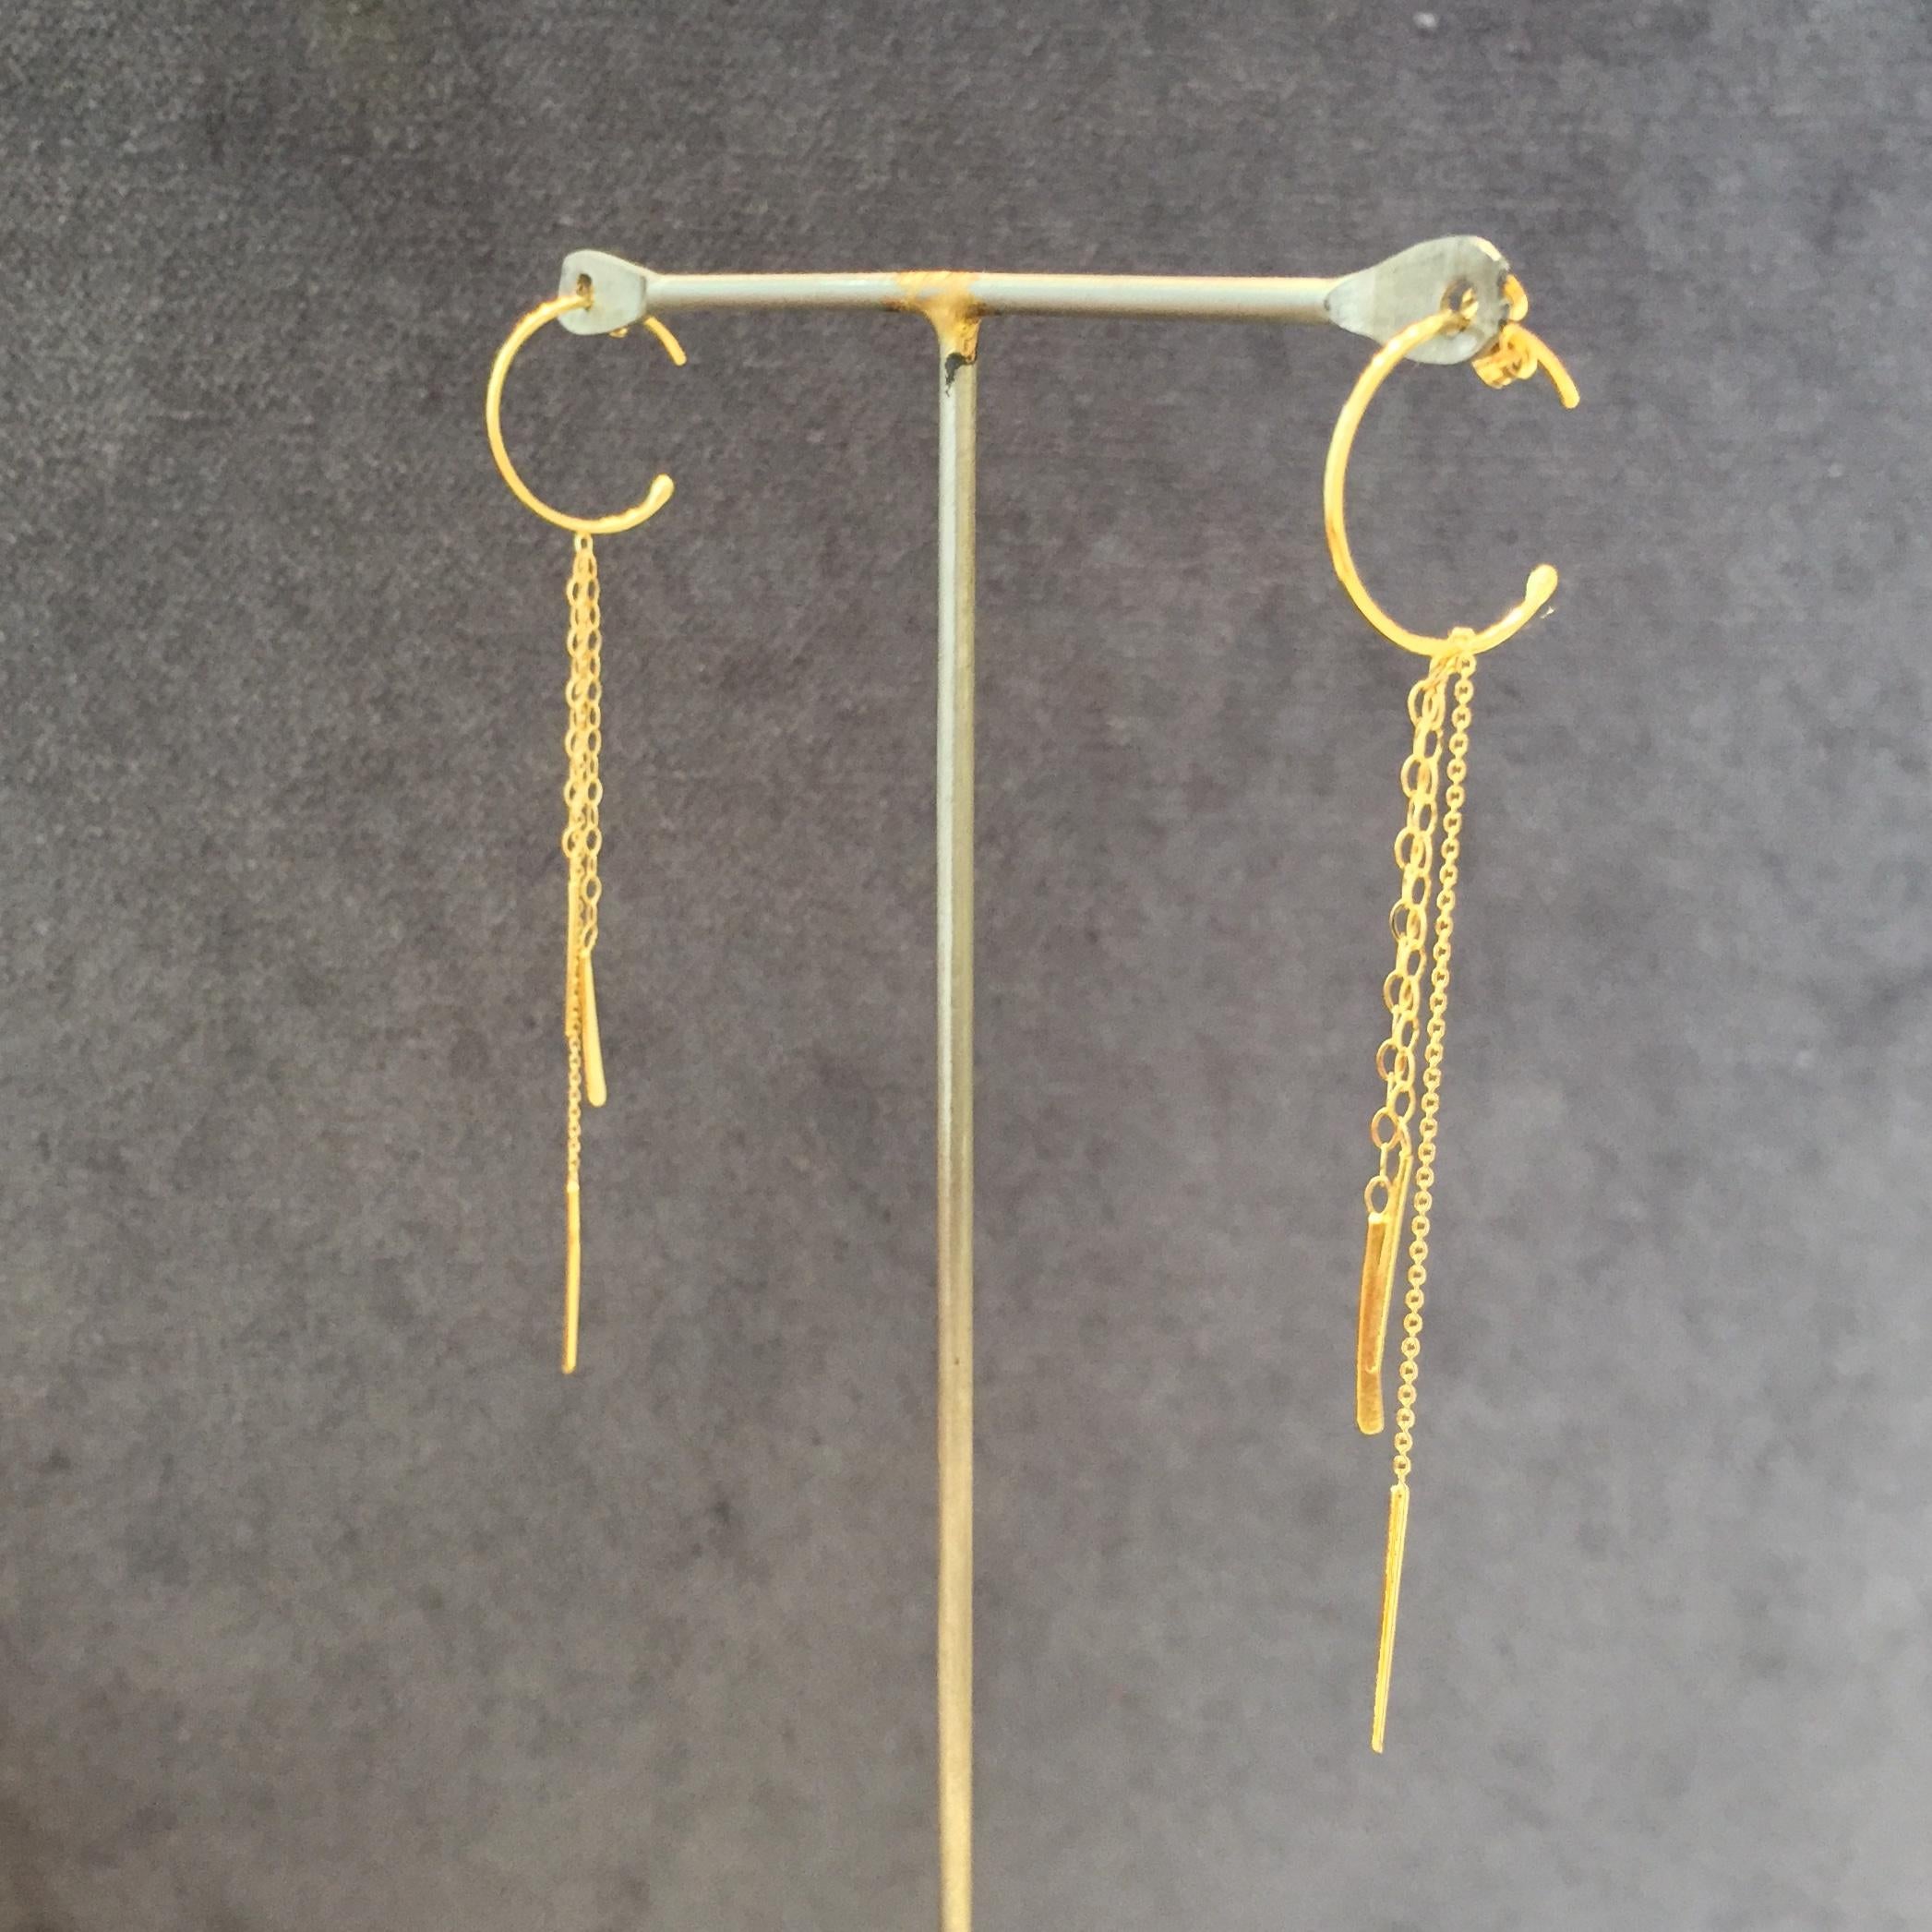 These pretty 18k yellow gold small hoop earrings are from Sweet Pea's 'Sycamore' range and feature three strands of glistening diamond cut hanging chain with bar details on the end. The hoop diameter is 1.4cm and the overall length of each earring